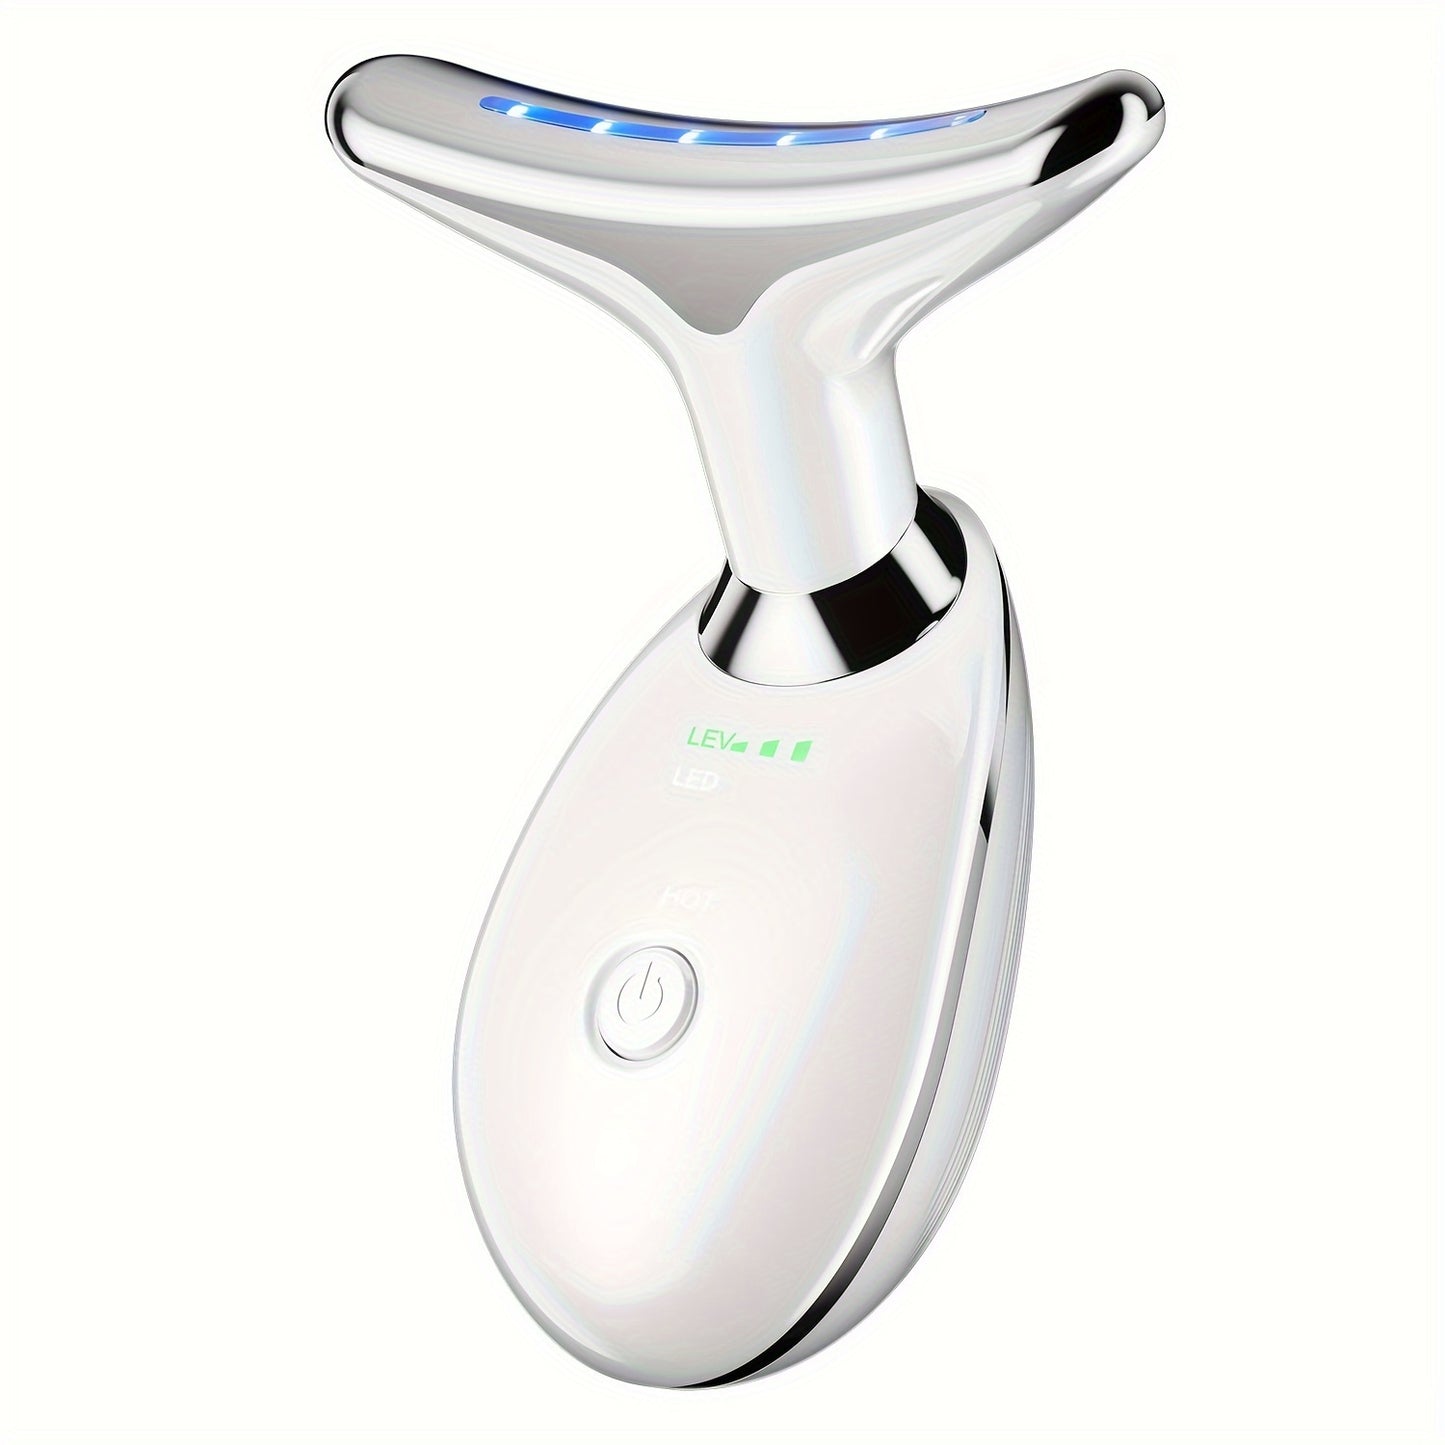 Valentine's Day Gift Mother's Day Gift Device For Neck Face, Double Chin Vibration Facial Massager With Three Uses LED Heat Modes For Skin Care Christmas Gifts